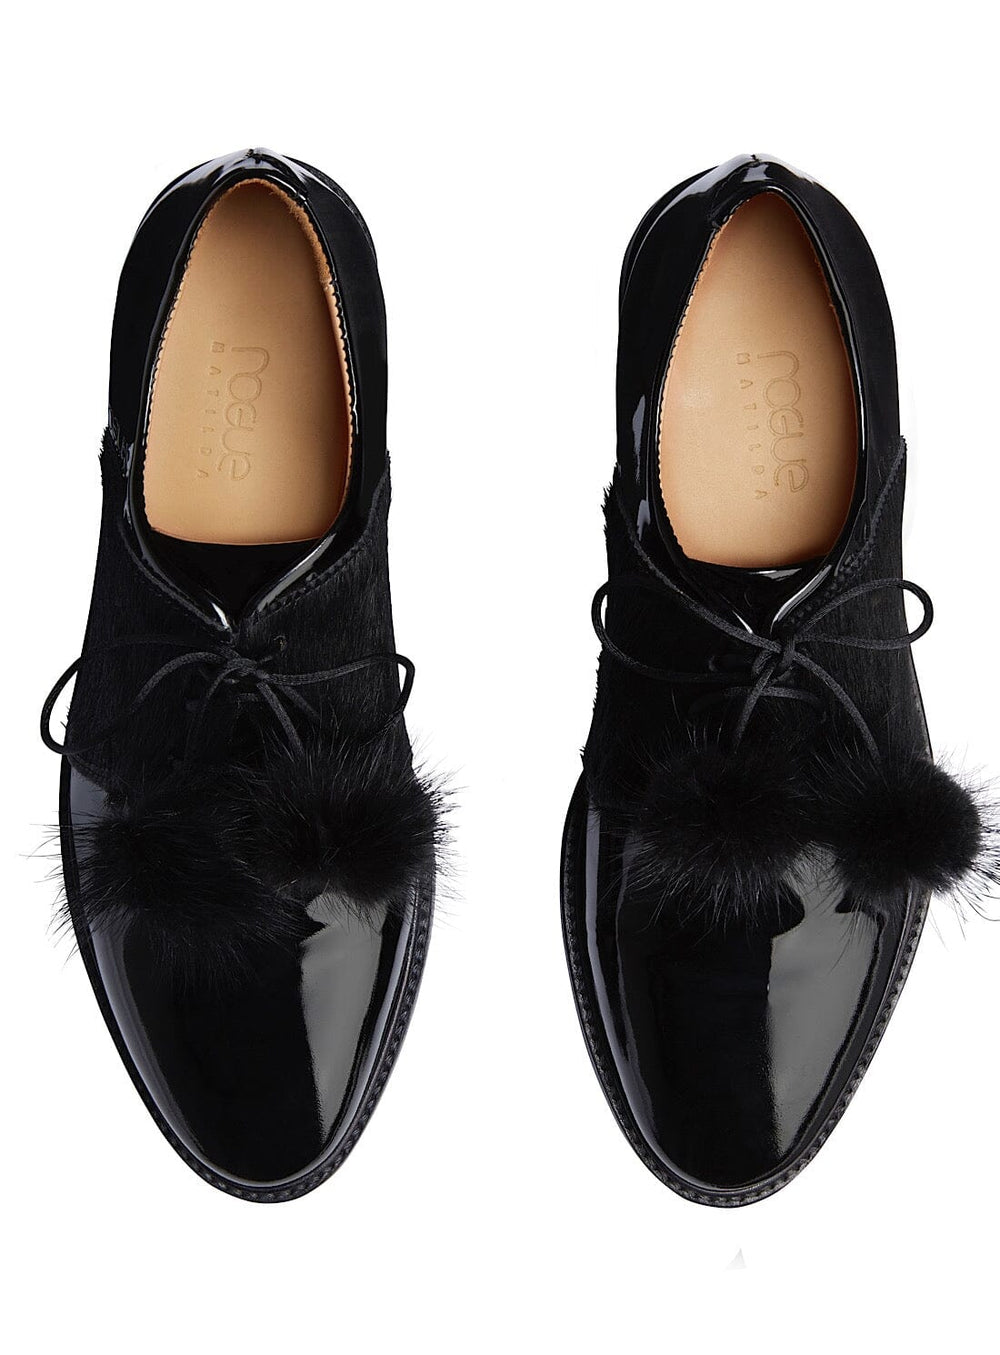 Pomme Noir in Black Patent Shoes YBDFinds 